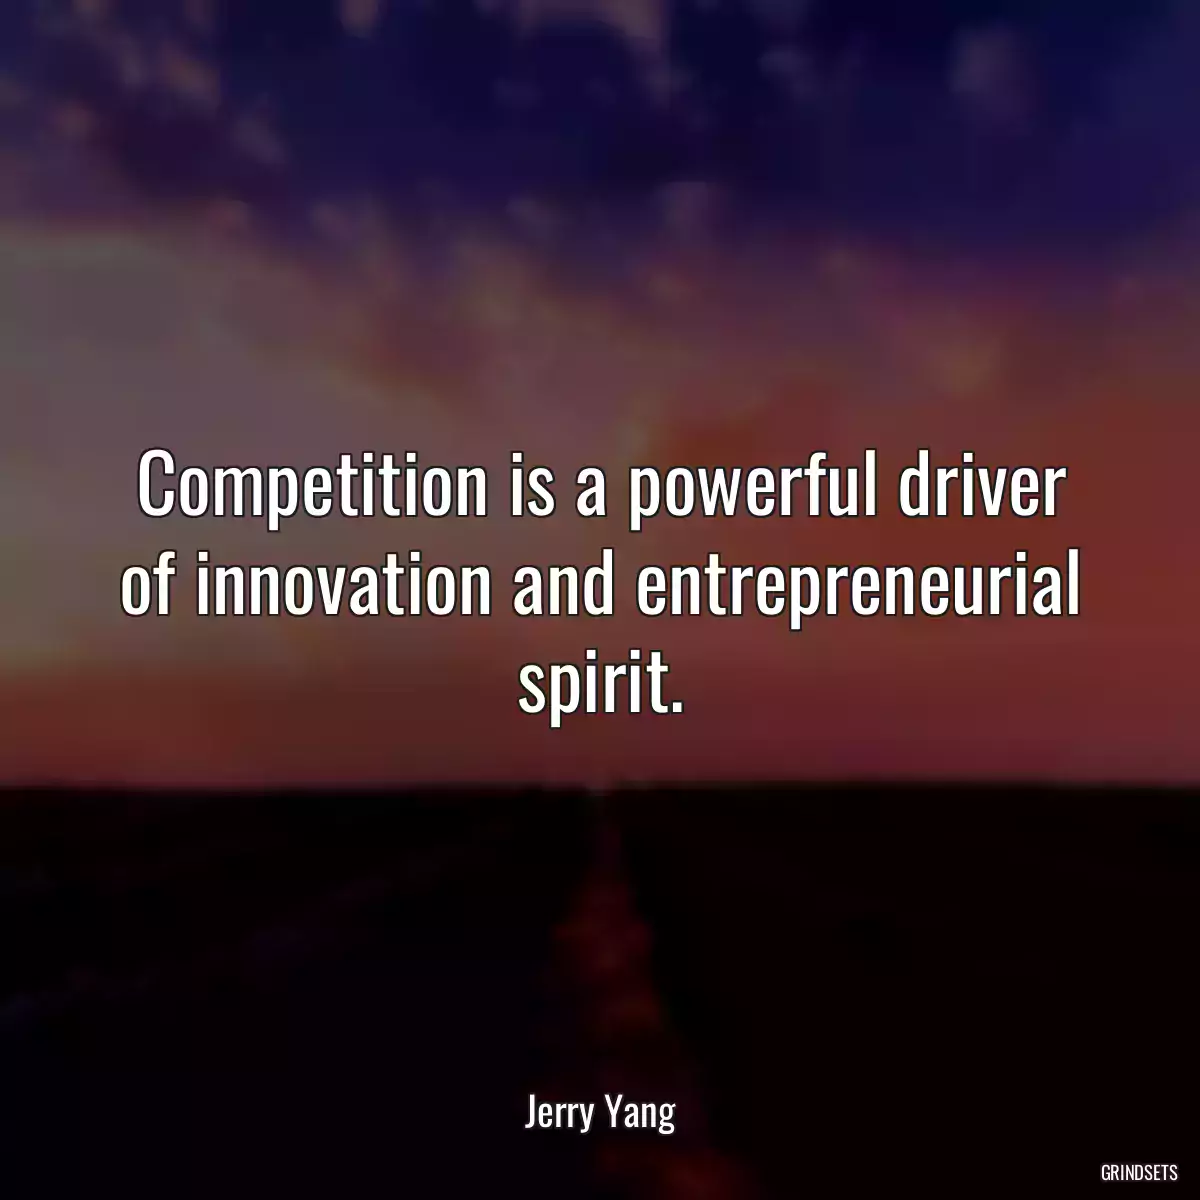 Competition is a powerful driver of innovation and entrepreneurial spirit.